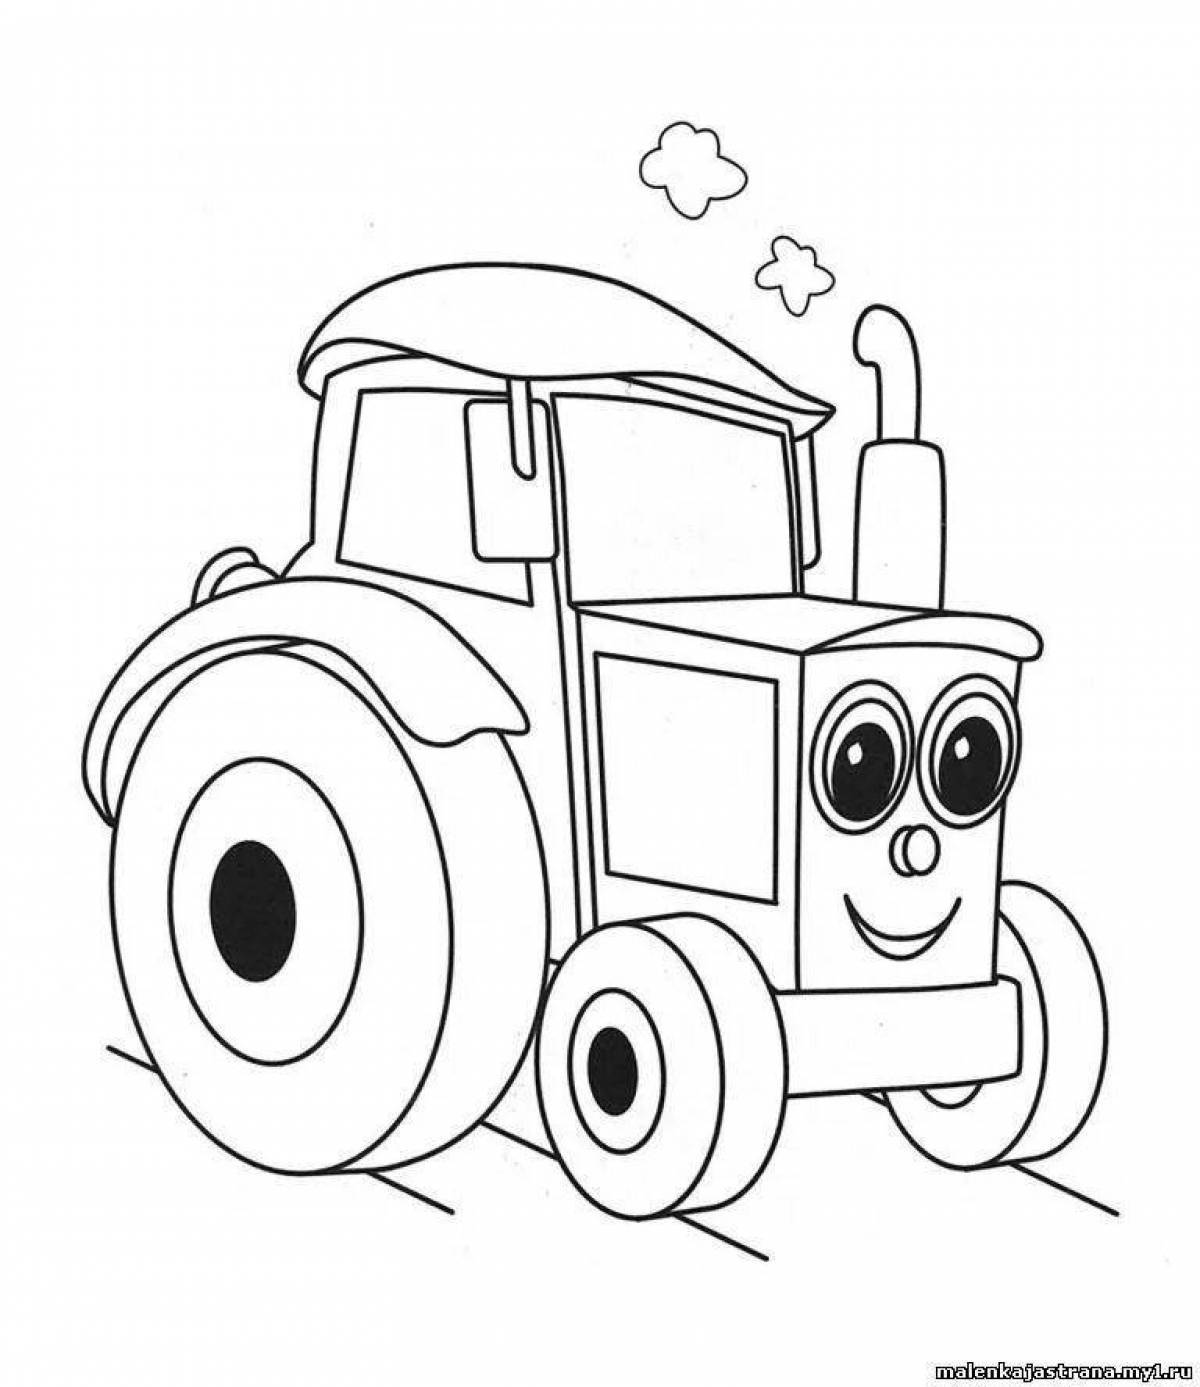 Superb cars 3 coloring pages for boys